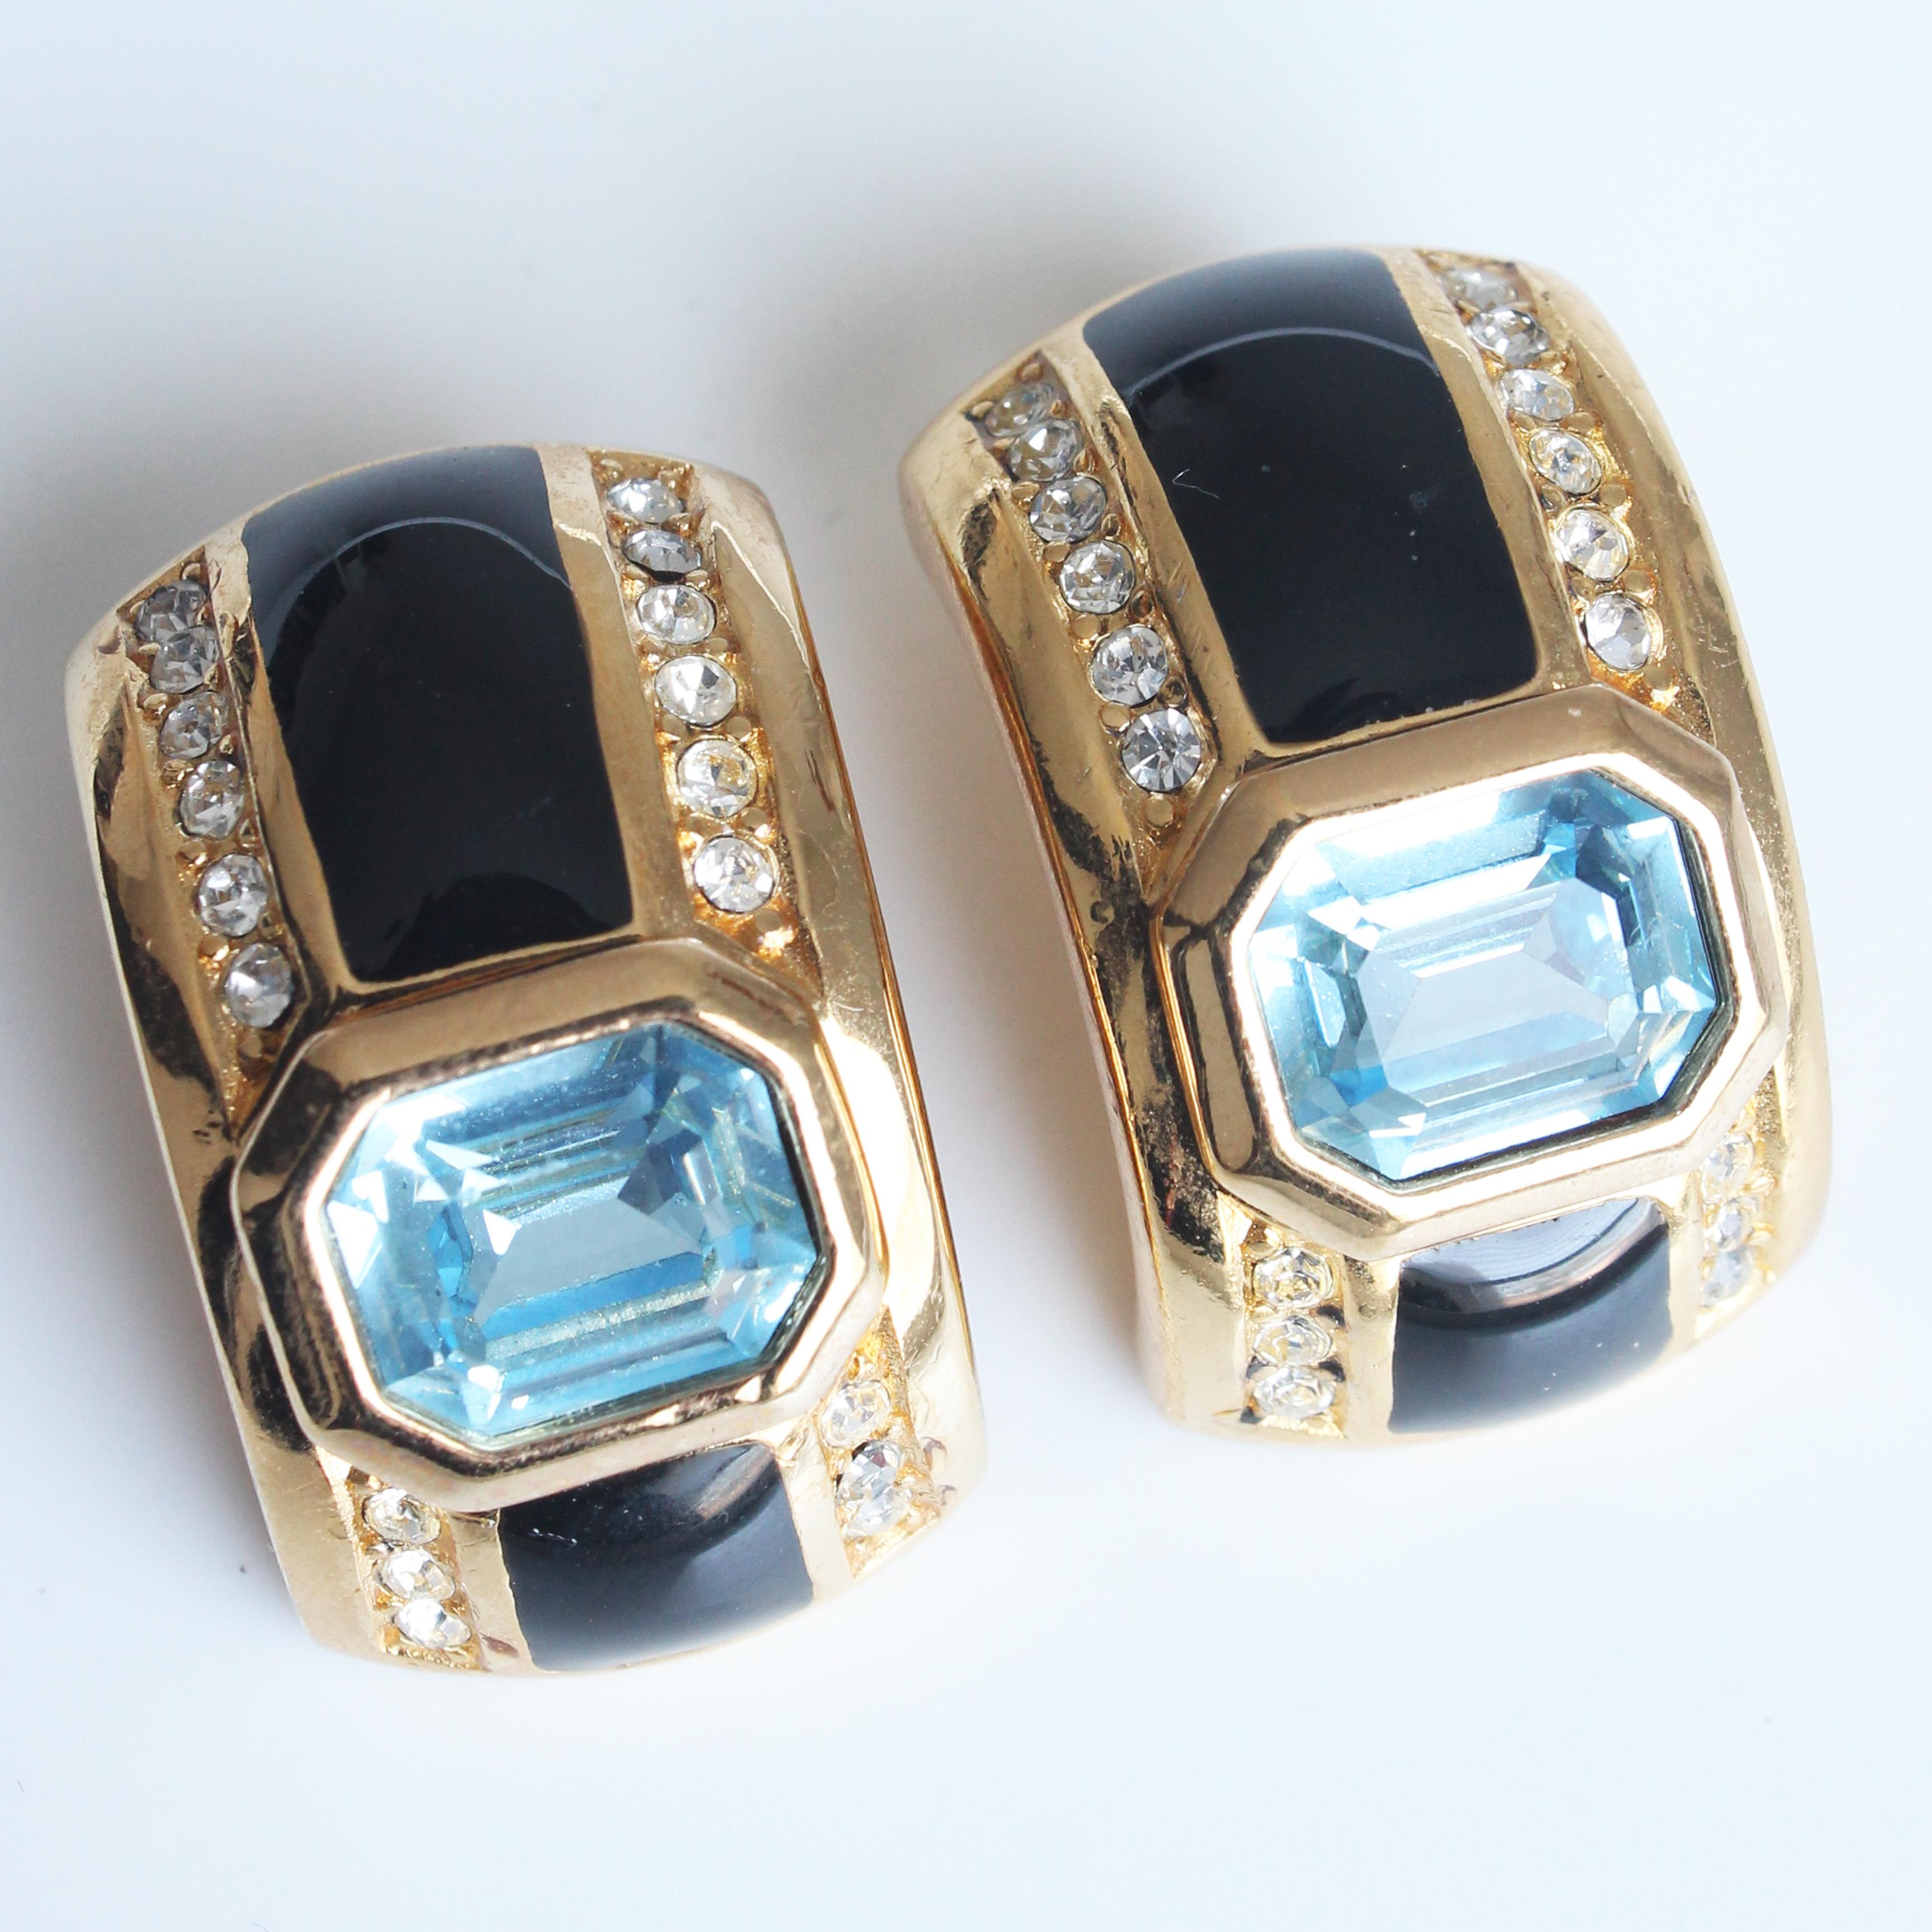 Christian Dior Art Deco Earrings with Faux Sapphire Topaz Crystals 1980s For Sale 4